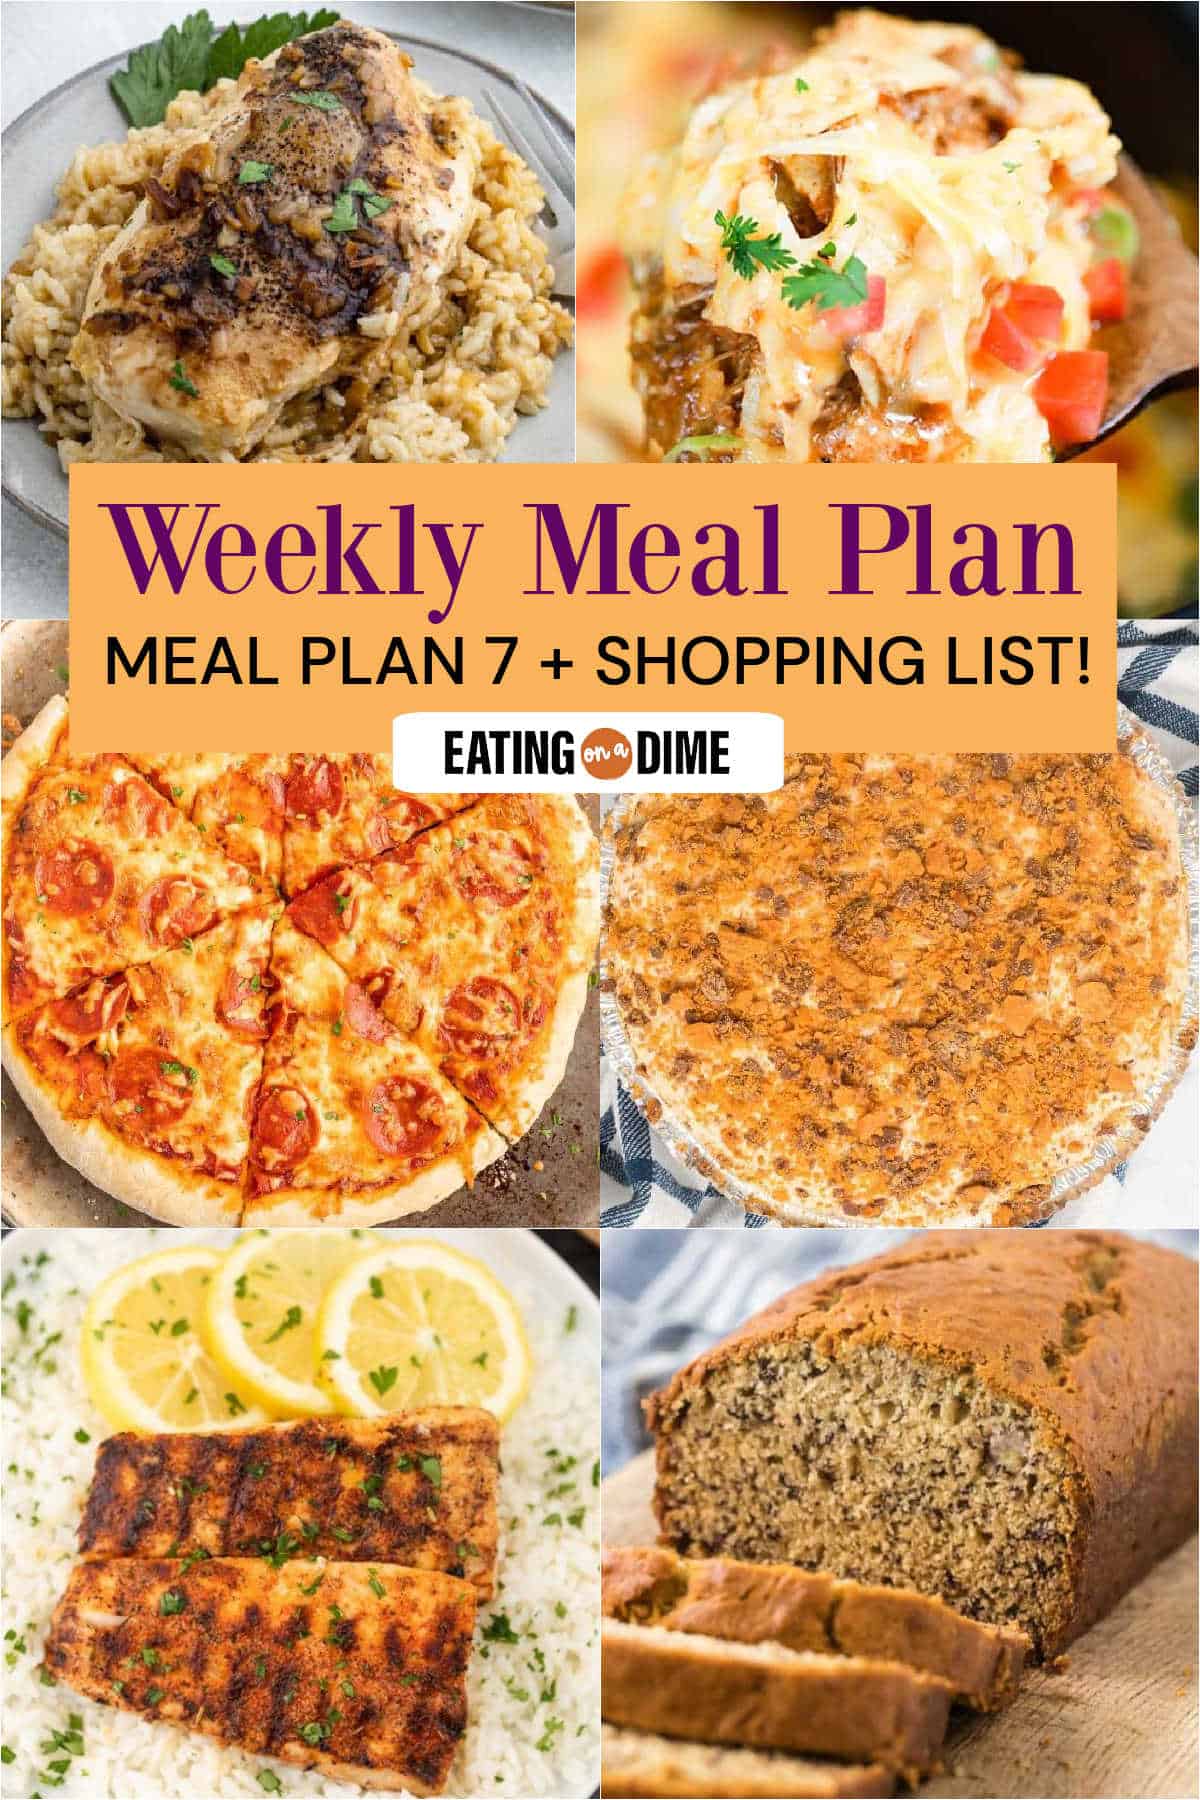 Picture of the meals from this week's meal plan: Instant Pot Beef Tips and Gravy, Crock Pot Shredded Beef Enchilada Casserole, Grilled Mahi Mahi, No Peek Chicken and Rice, Homemade Pizza Dough, Banana Bread and Butterfinger Pie! 
